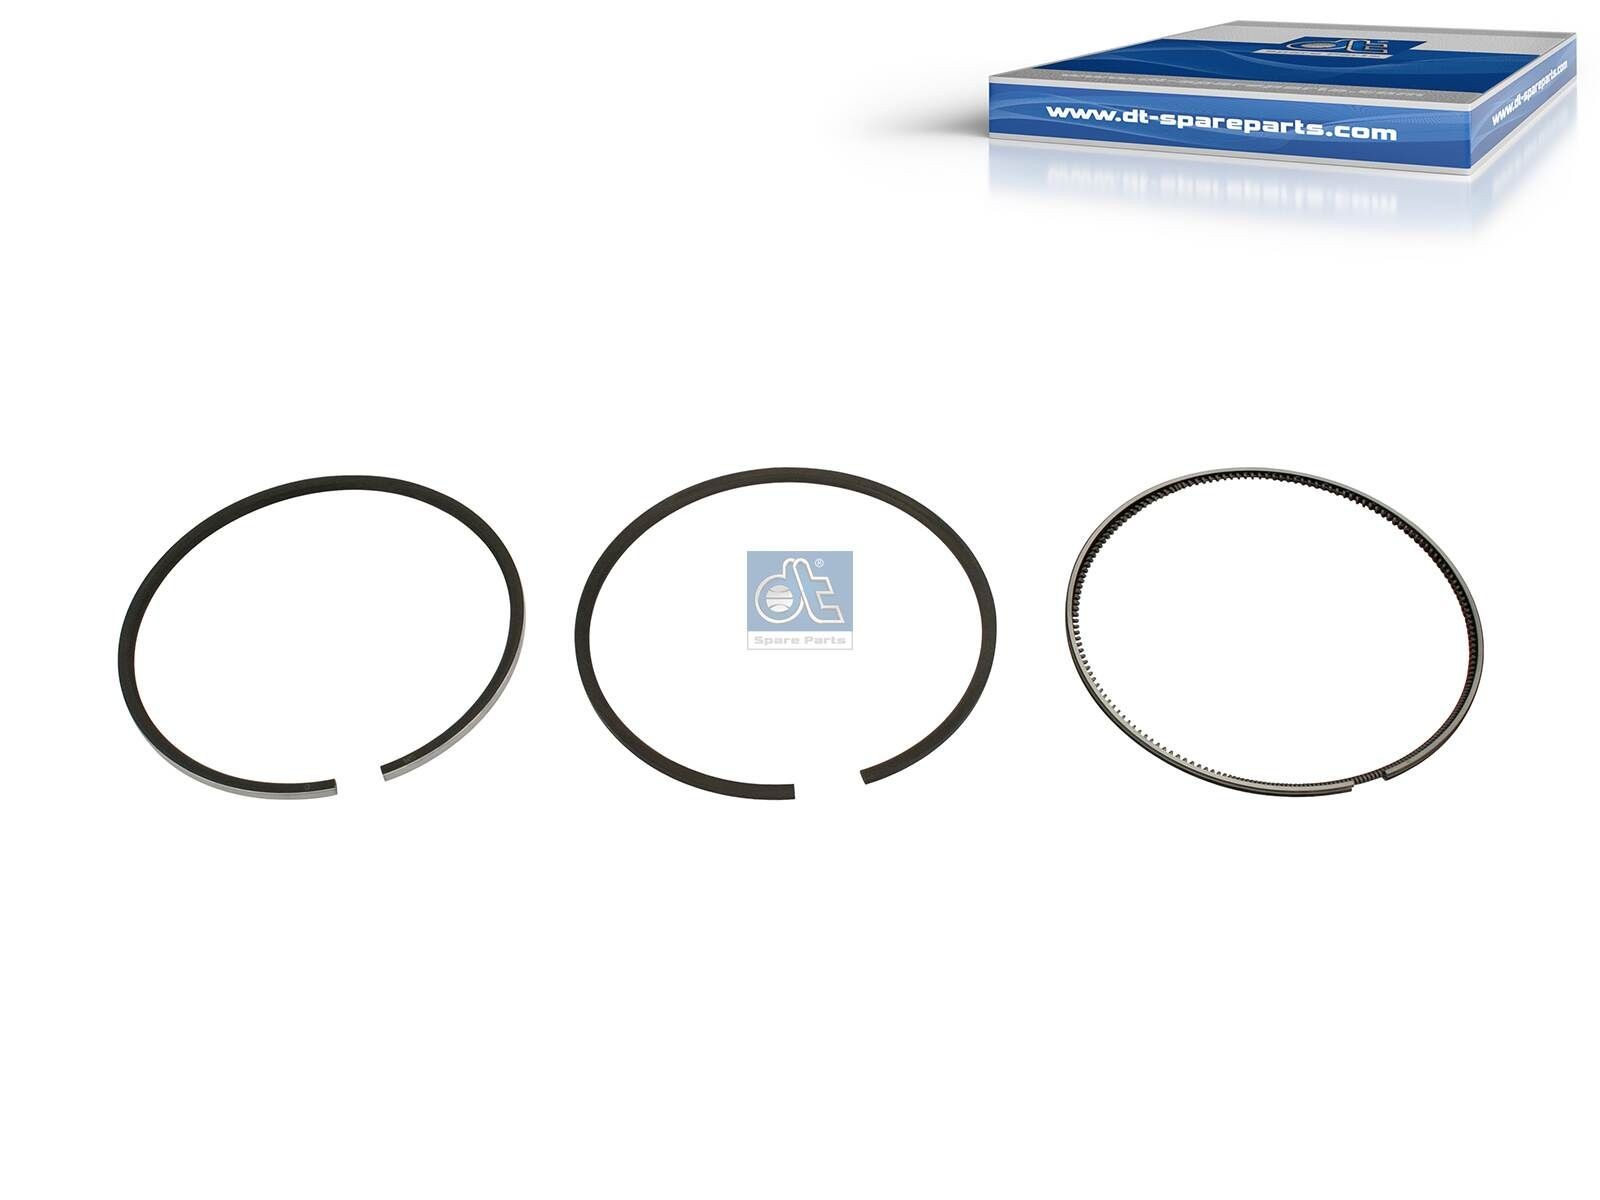 038 73 N0 DT Spare Parts 2.90125 Piston Ring Kit 74 20 747 511